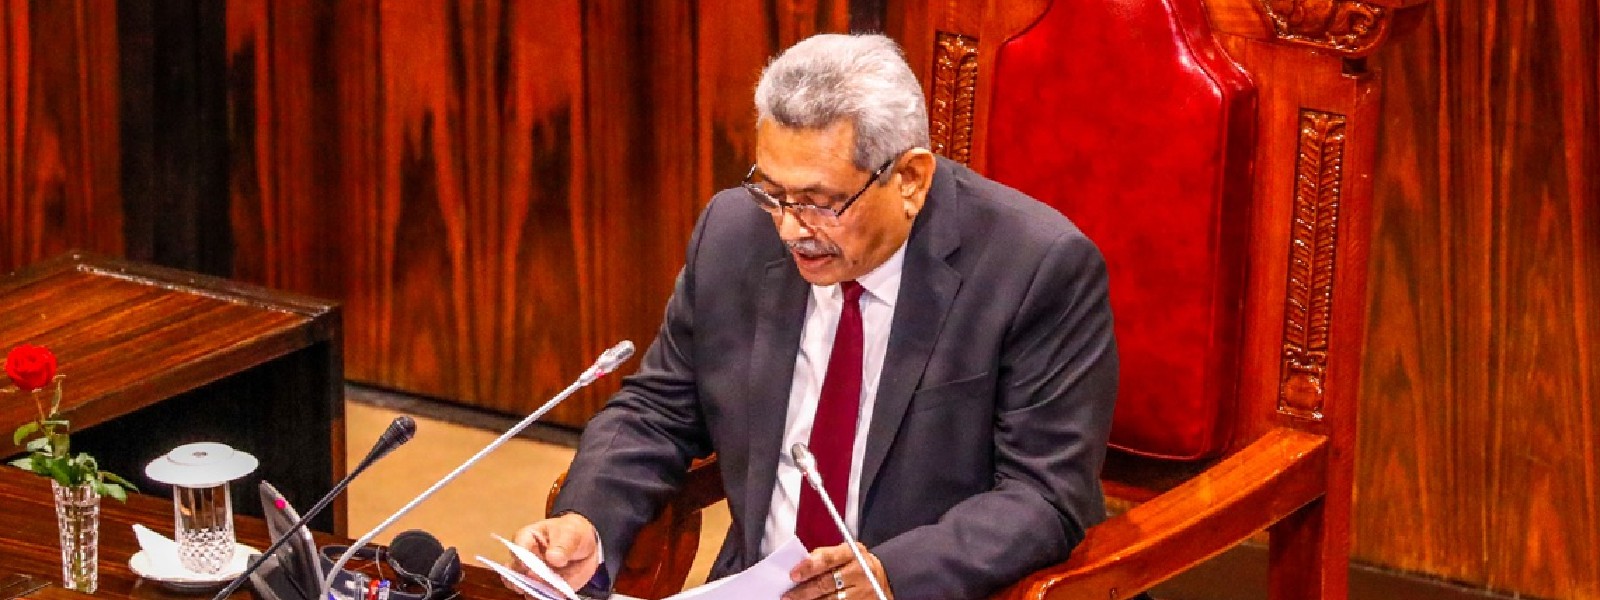 Sri Lanka President’s resignation received, official announcement on Friday (15)